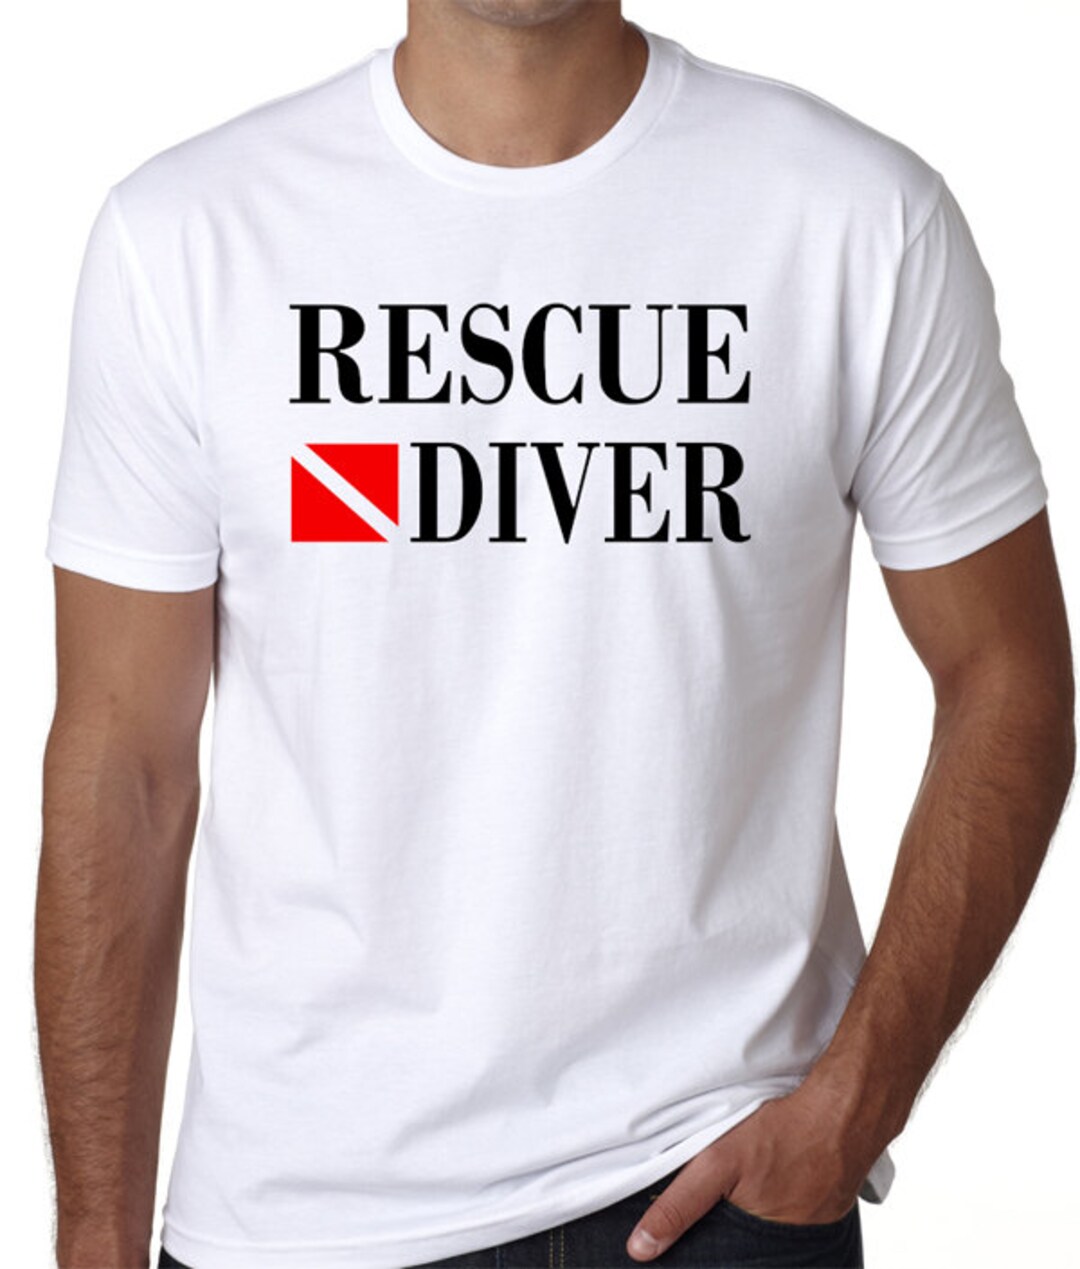 T-shirt Great Gift for Emergency Services - Etsy